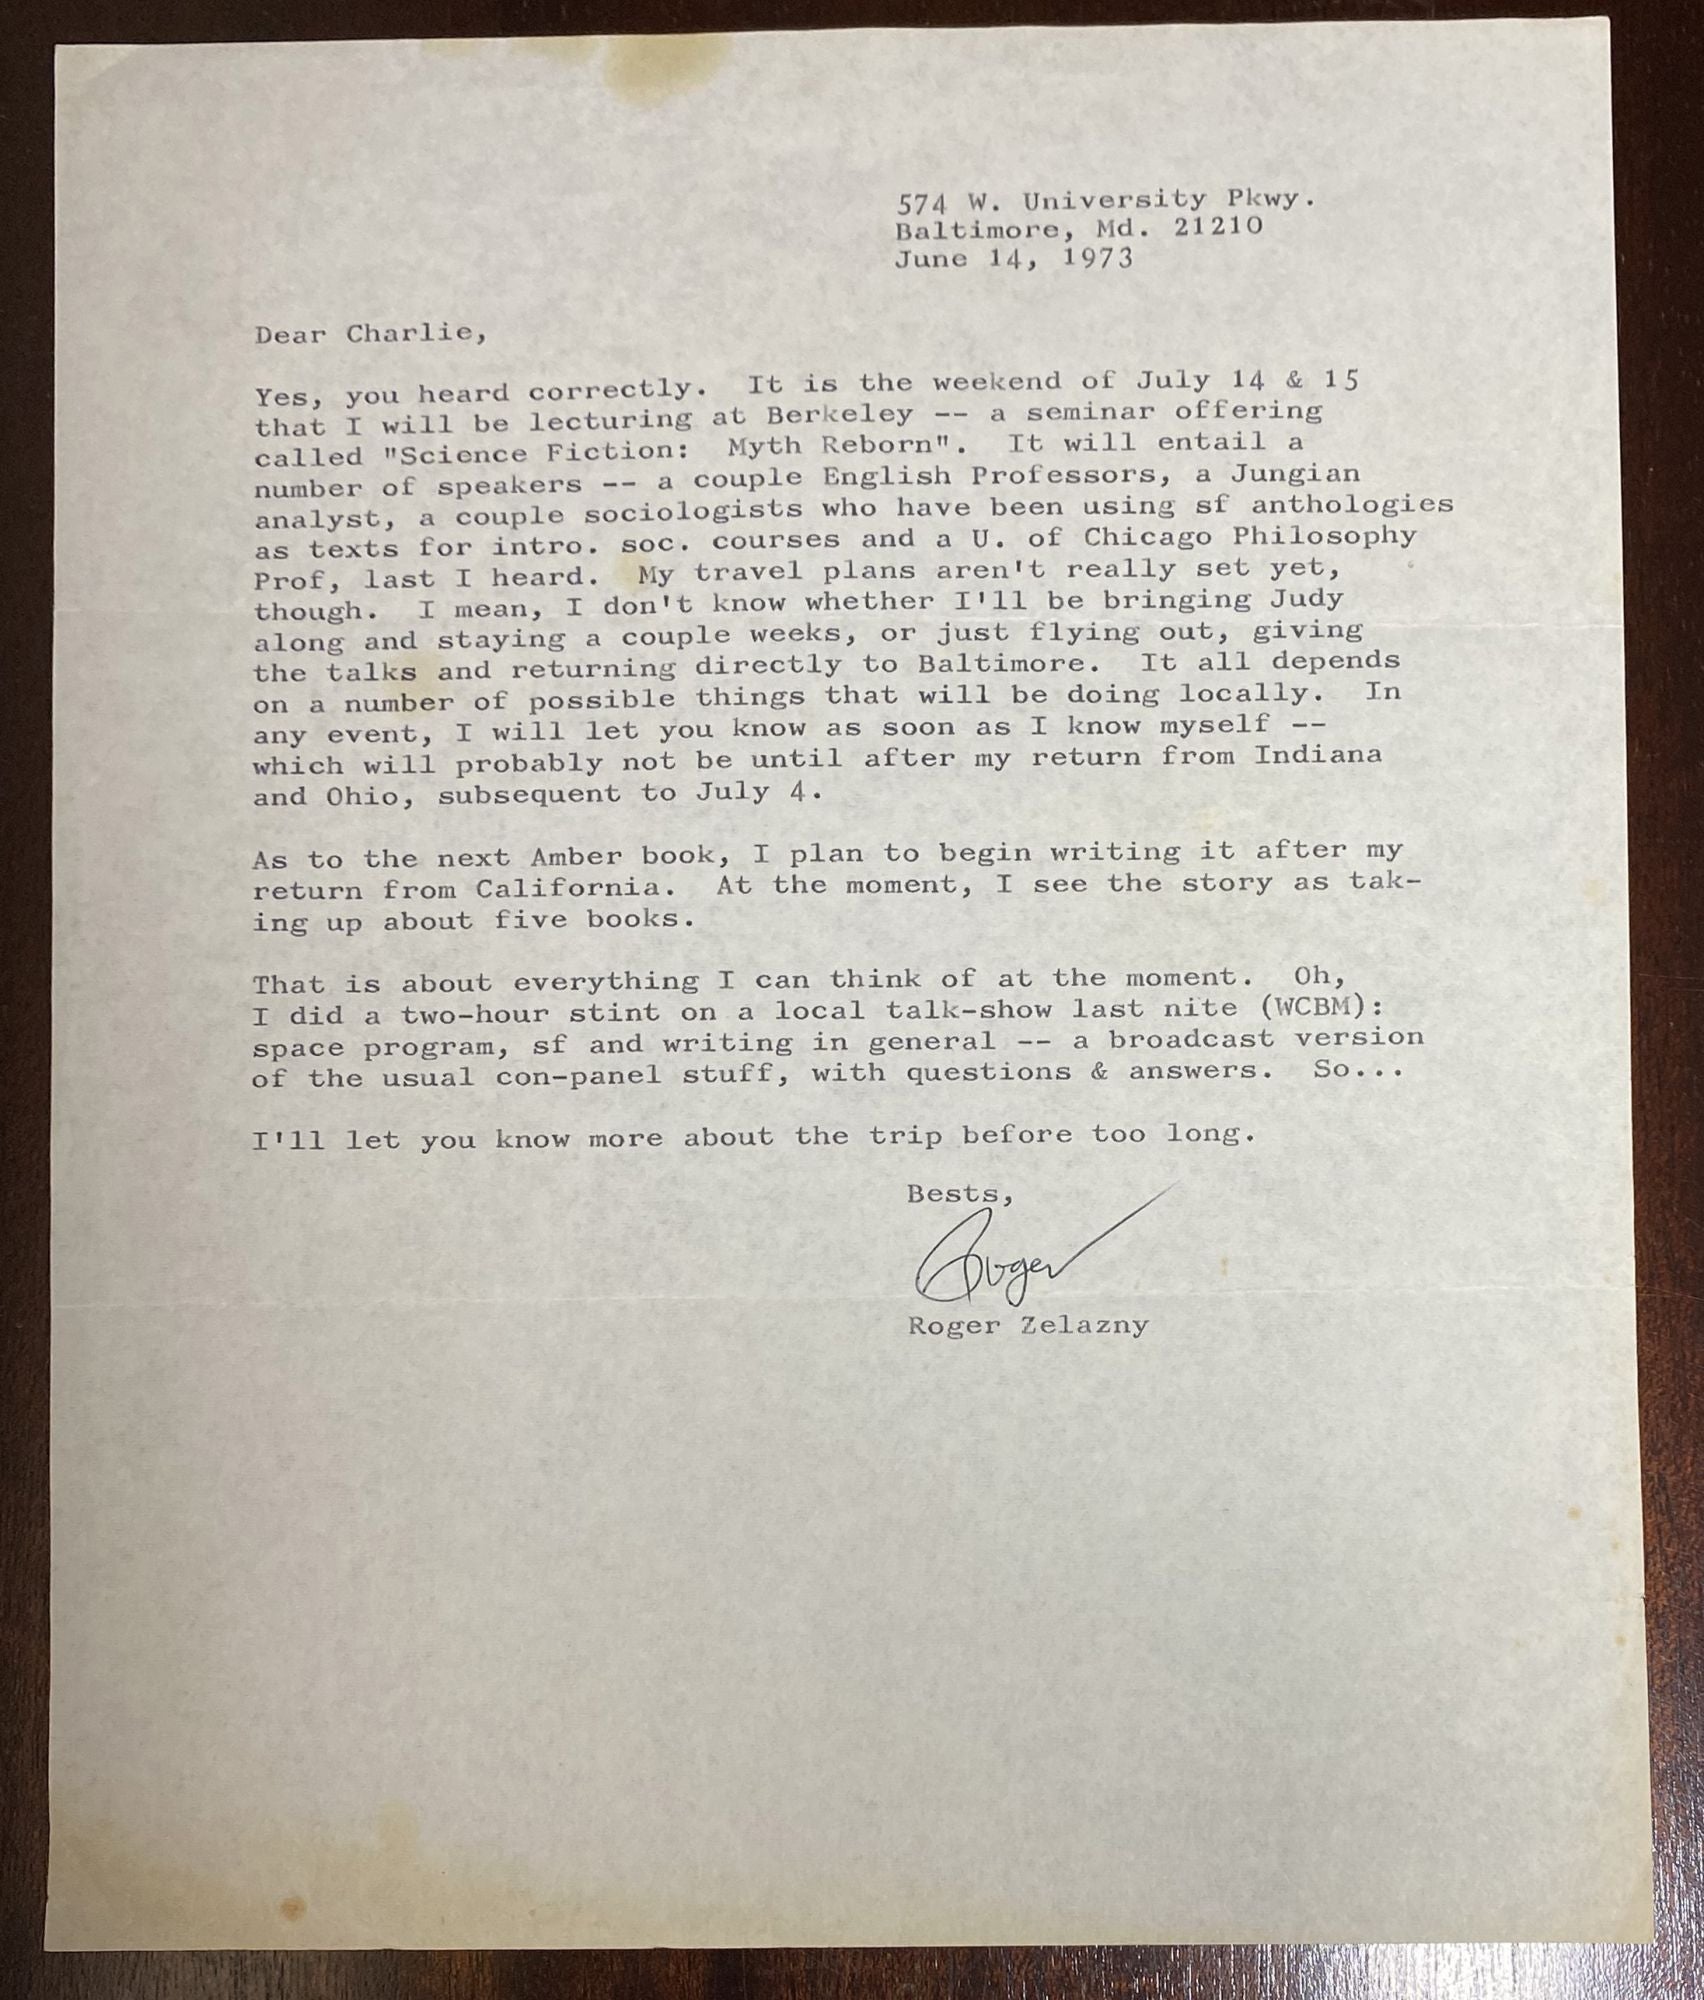 Zelazny, Roger - 1 Autograph Letter Typed and Signed (Als)